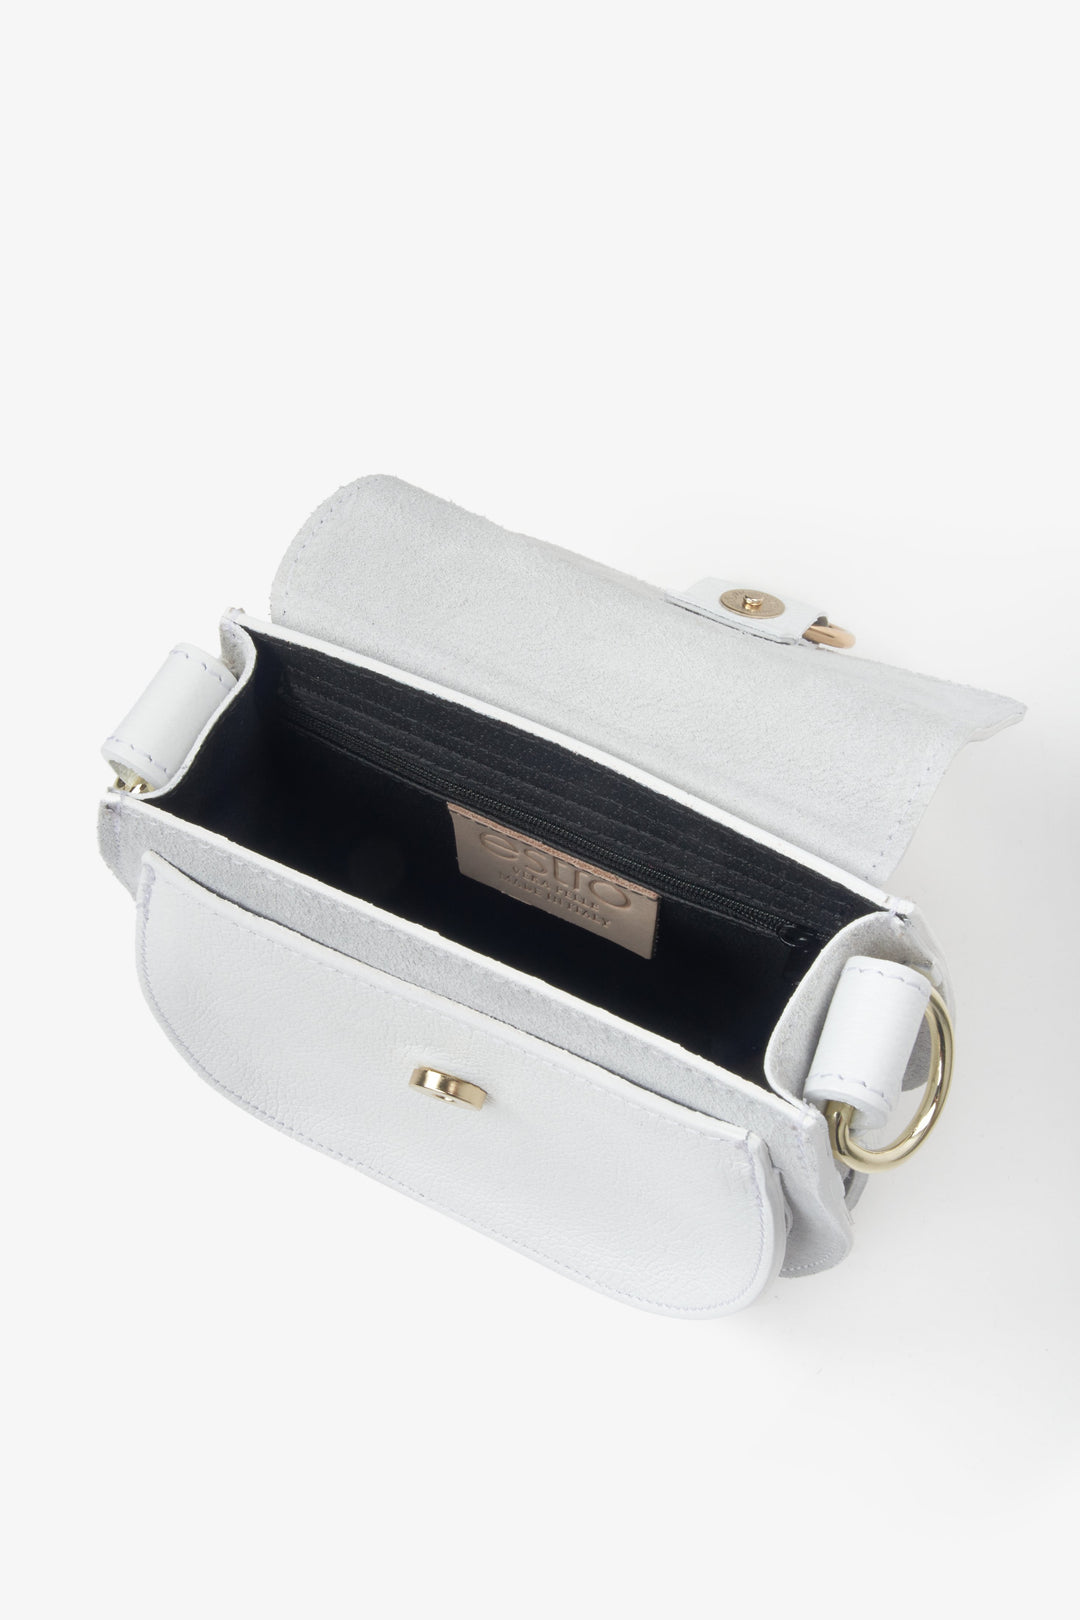 Women's white shoulder bag by Estro handmade in Italy - close up on the lining.